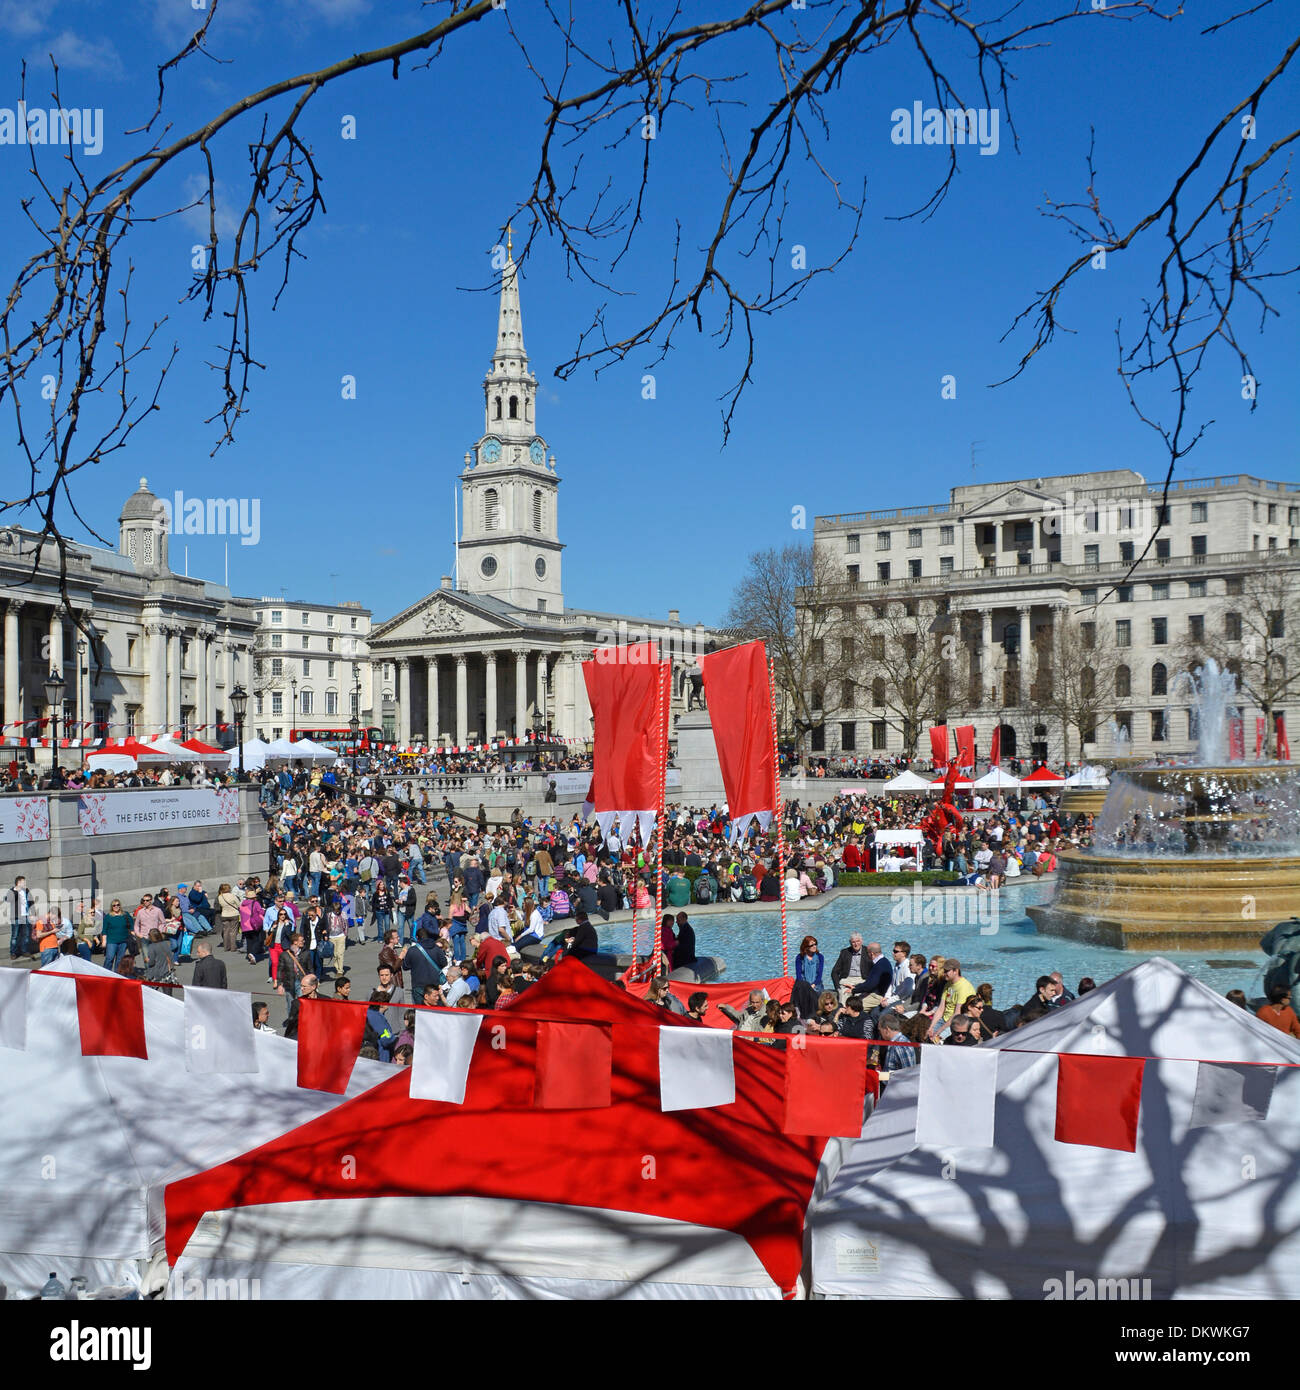 Red & white bunting at Mayor of London Feast of St George event & celebrations crowd of people blue sky spring day Trafalgar Square London England UK Stock Photo